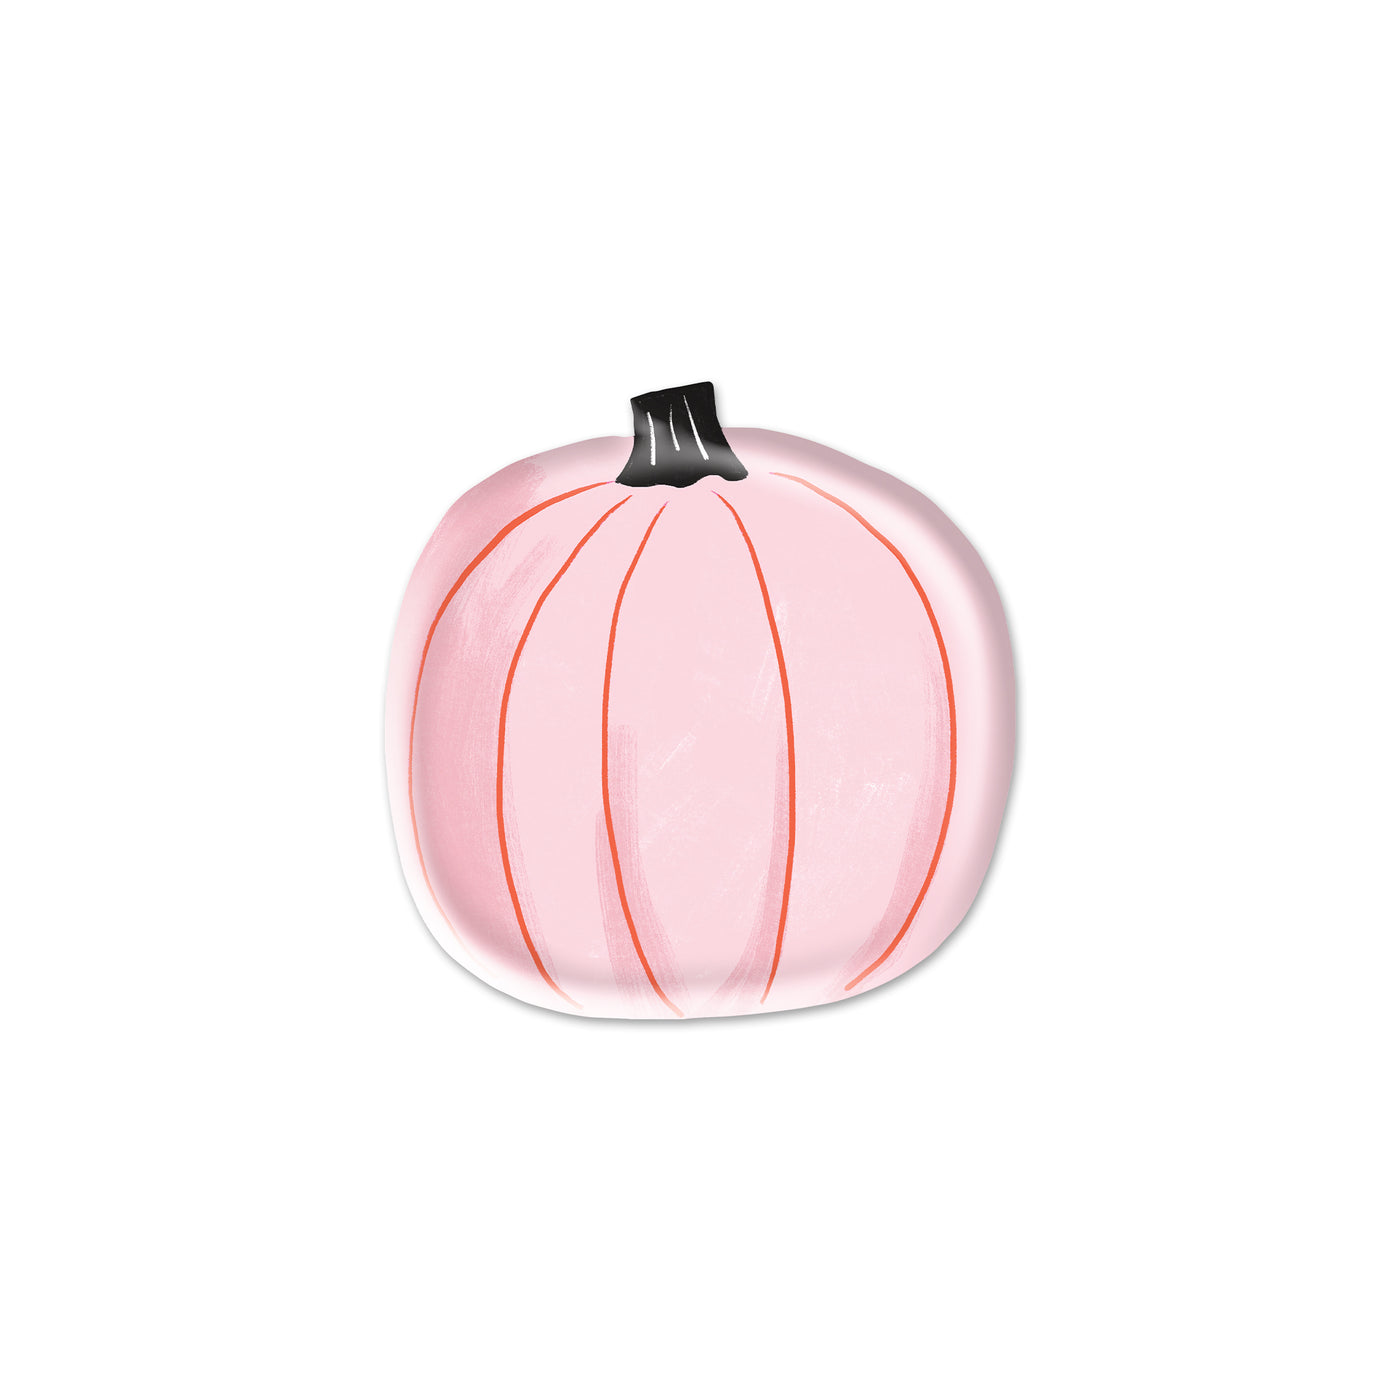 HNT848 - Happy Haunting Pink Pumpkin Shaped 7" Plate